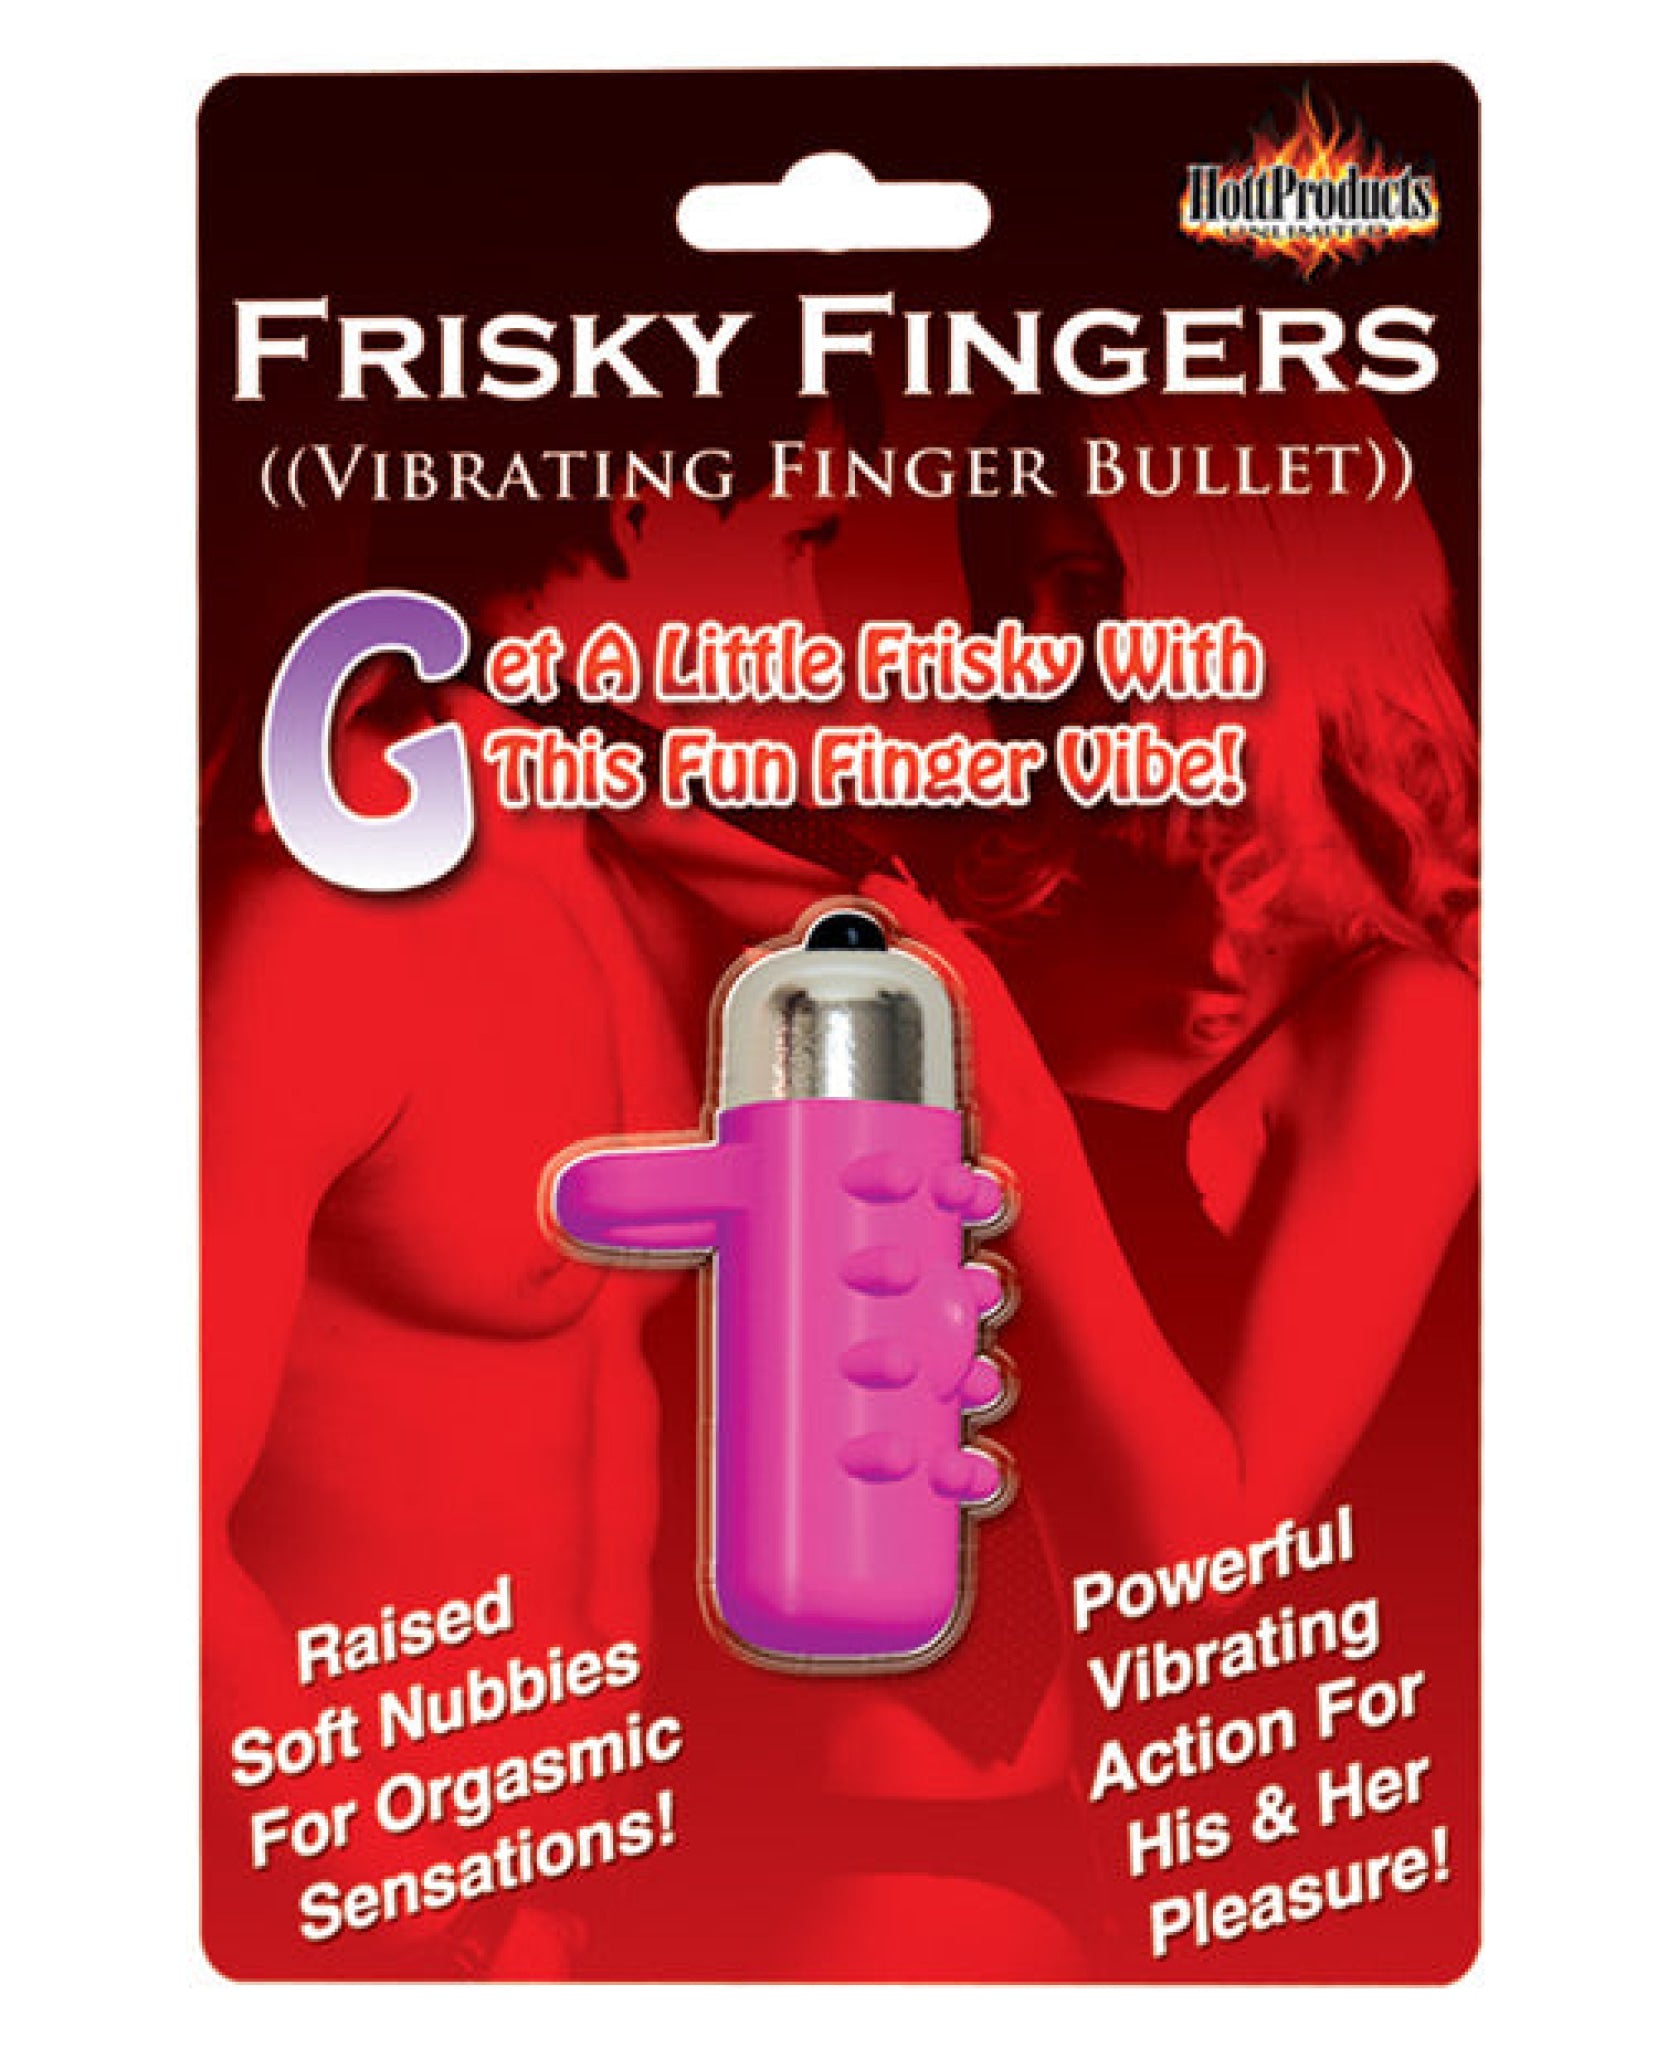 Frisky Fingers Hott Products